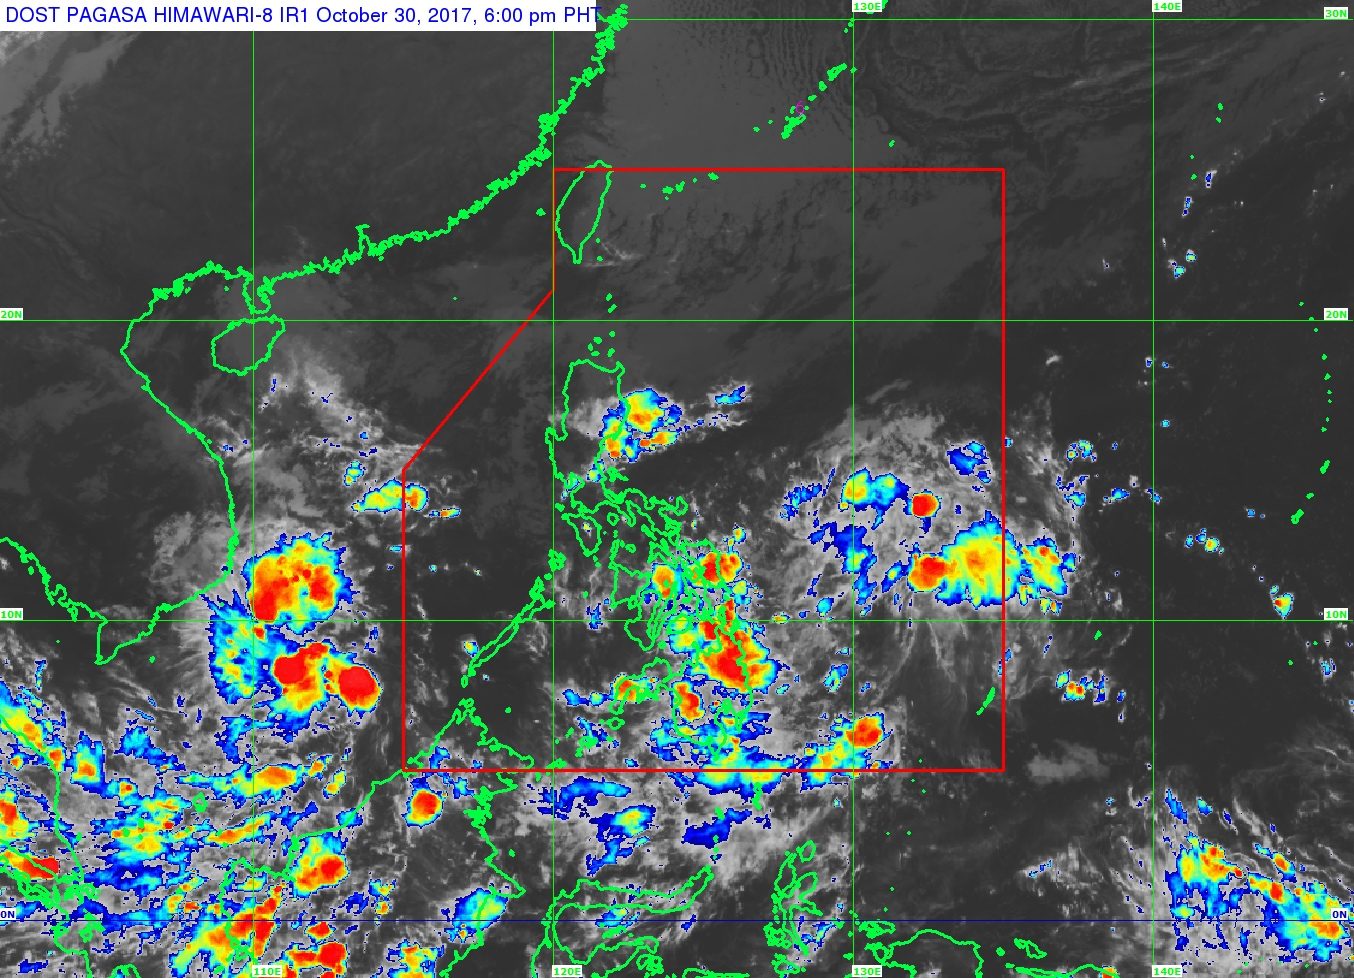 Low pressure area to bring rain on October 31